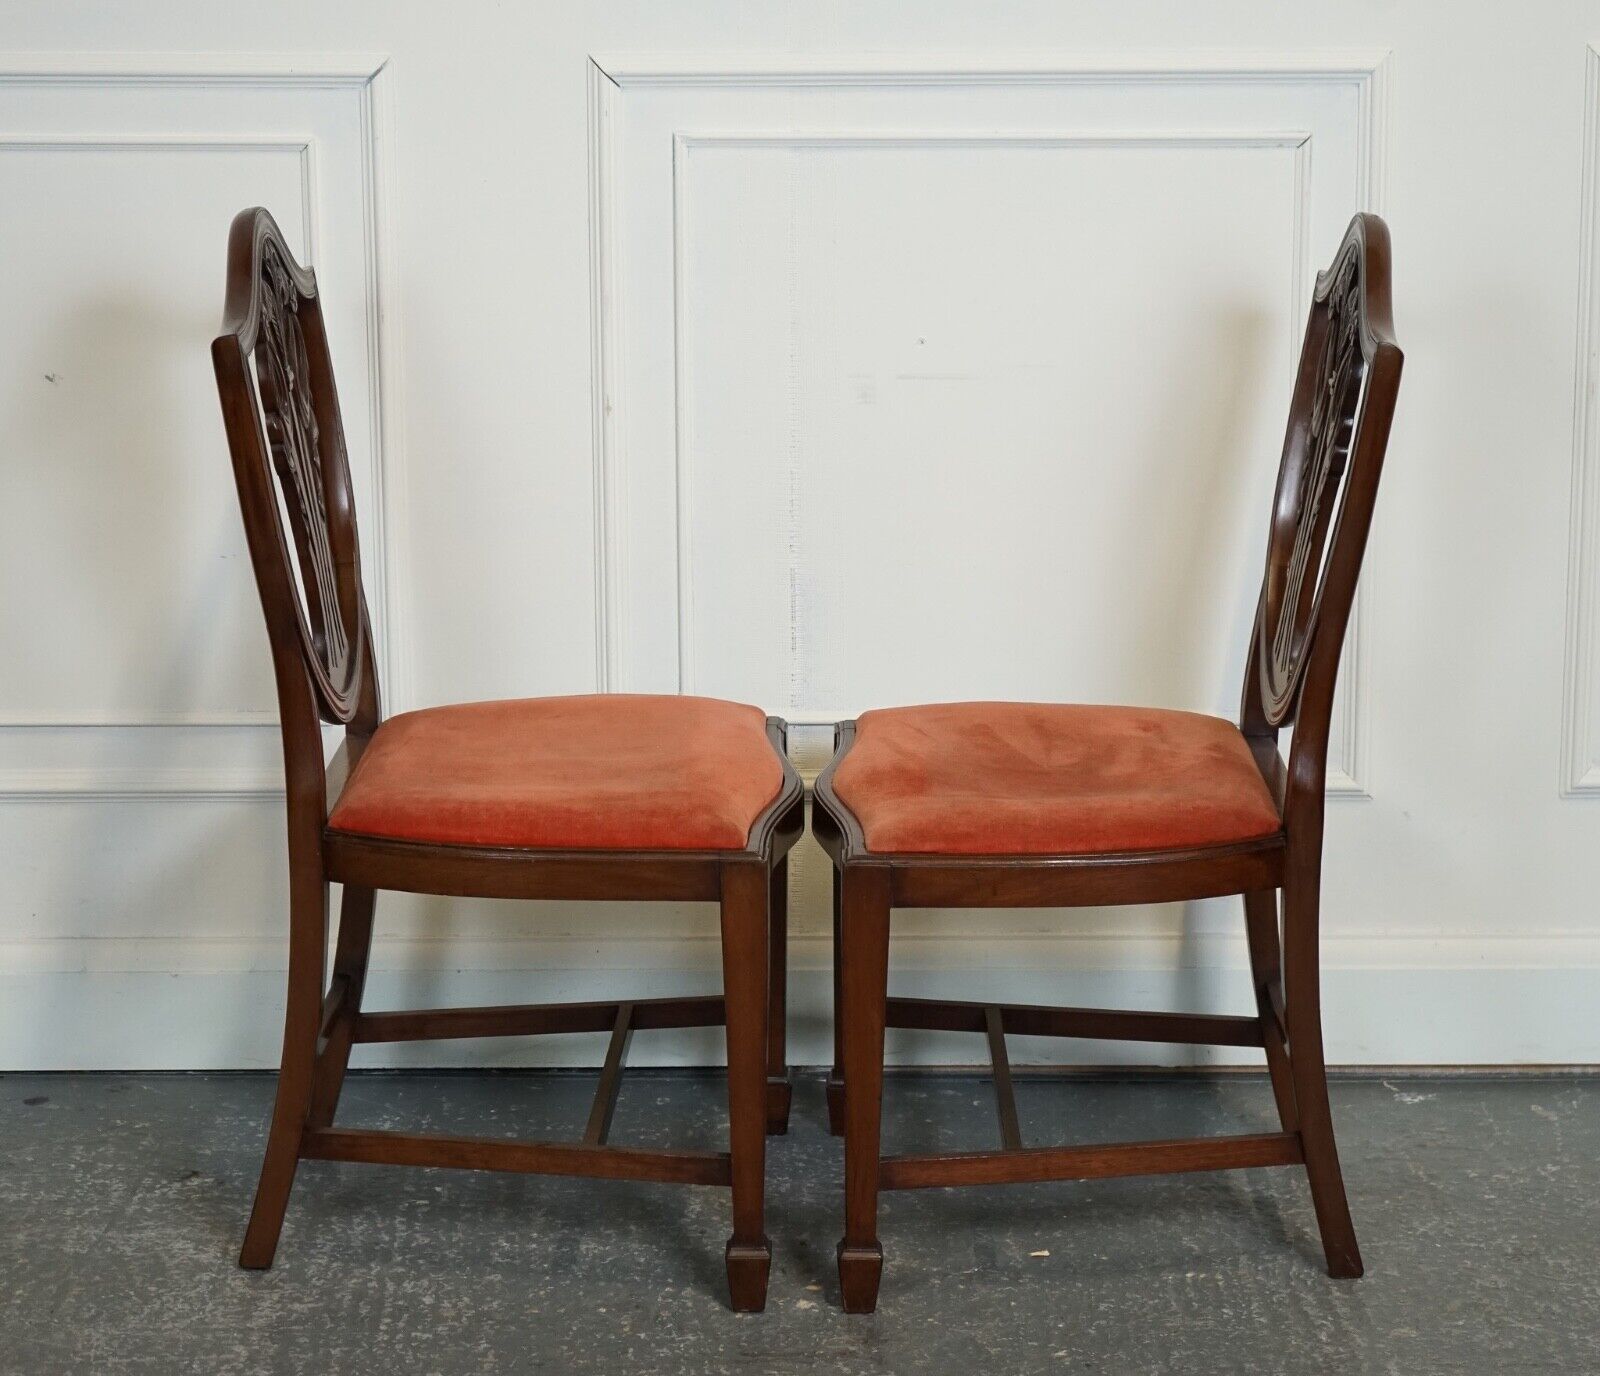 LOVELY PAiR OF VICTORIAN HEPPLEWHITE CARVER HALLWAY SIDE CHAIRS FEATHER FILLED